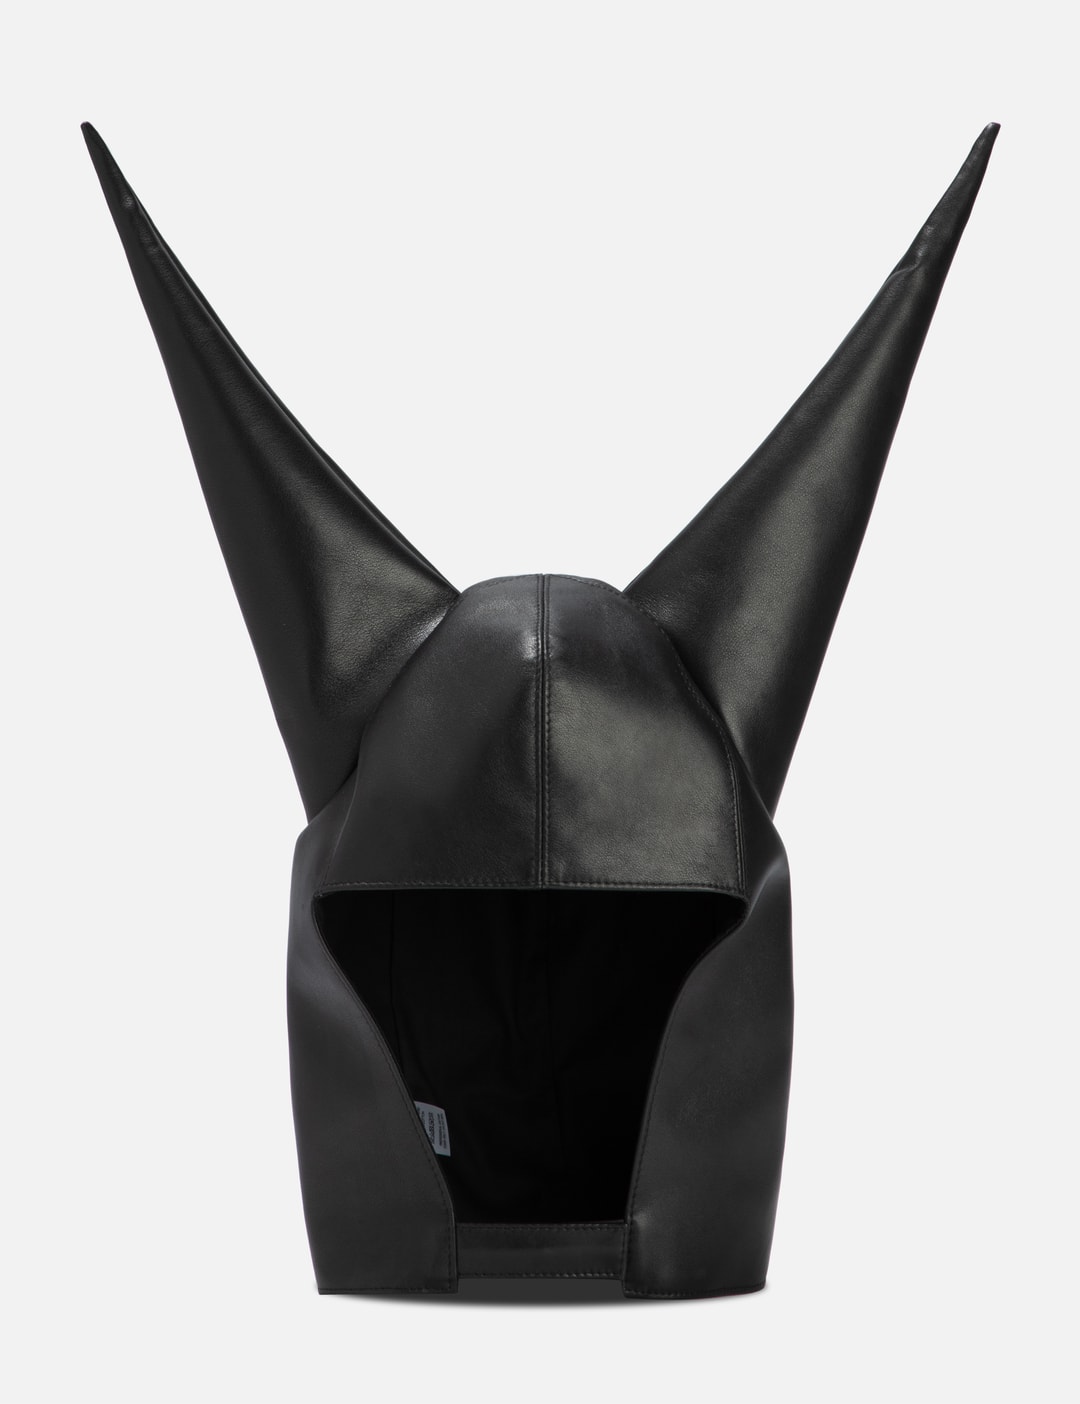 ANONYMOUS CLUB - LEATHER DUNCE CAP | HBX - Globally Curated Fashion and ...